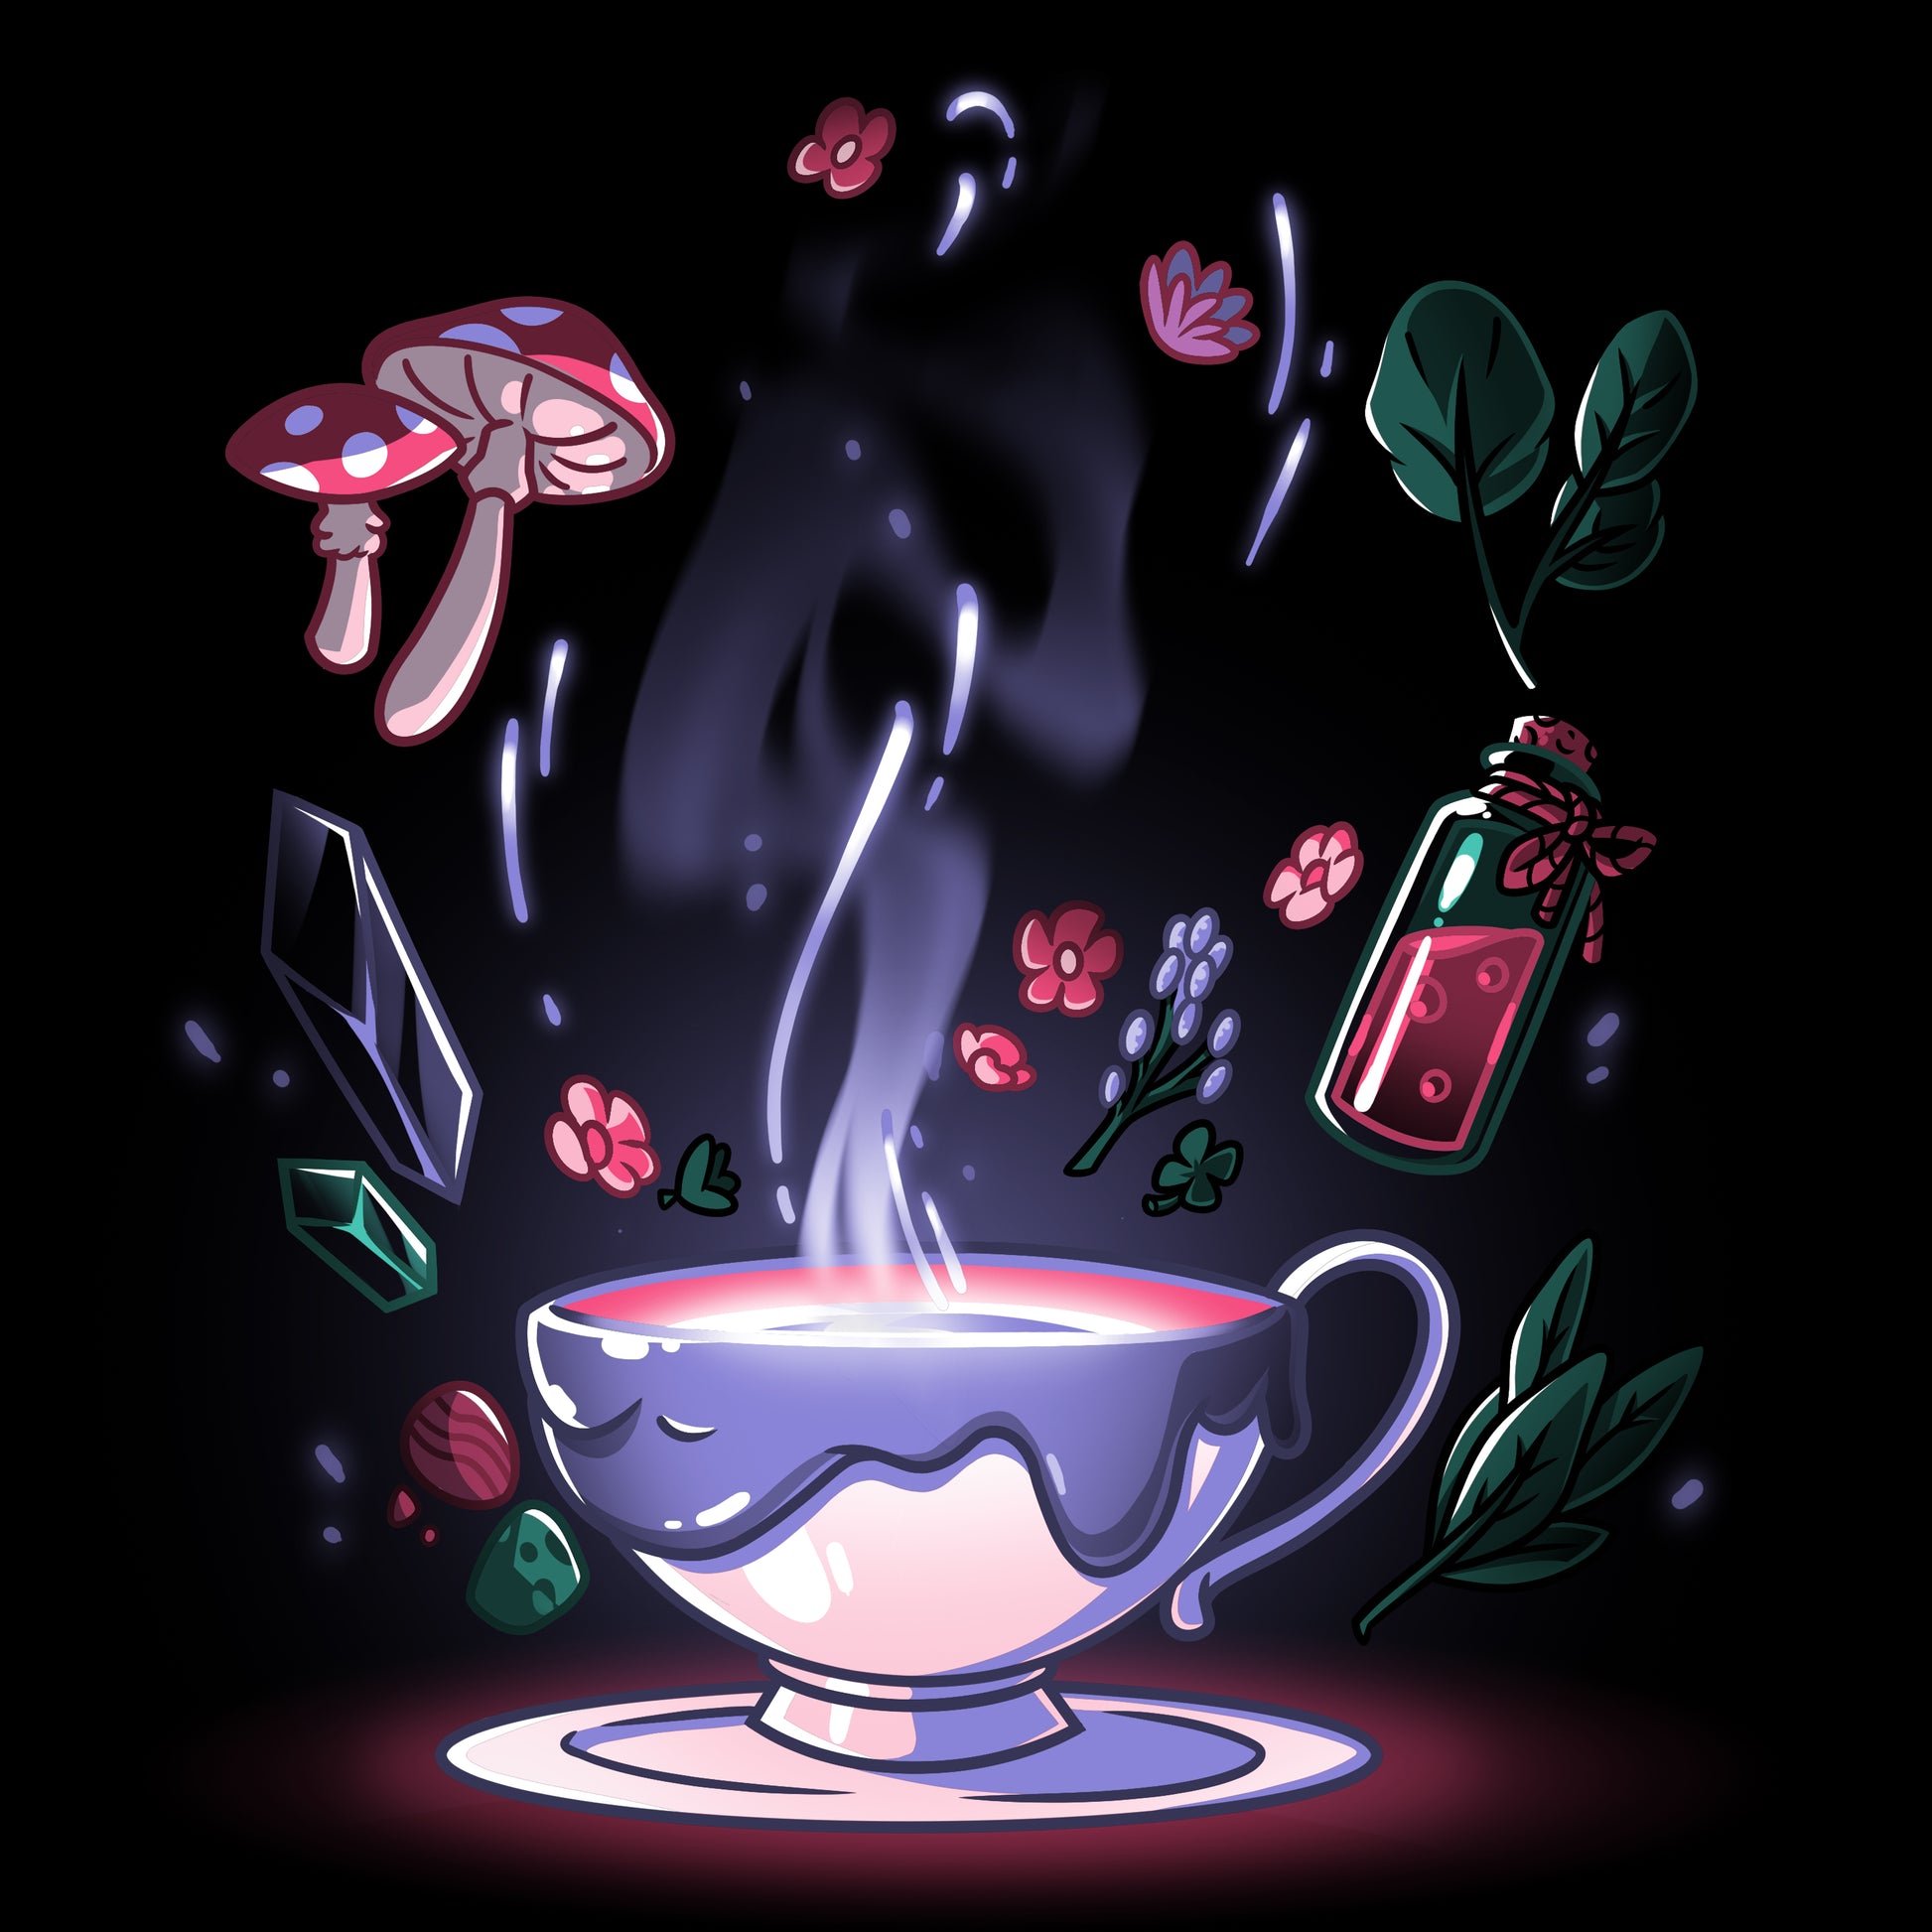 A TeeTurtle black t-shirt featuring an illustration of the Mystic Tea cup with flowers and mushrooms.